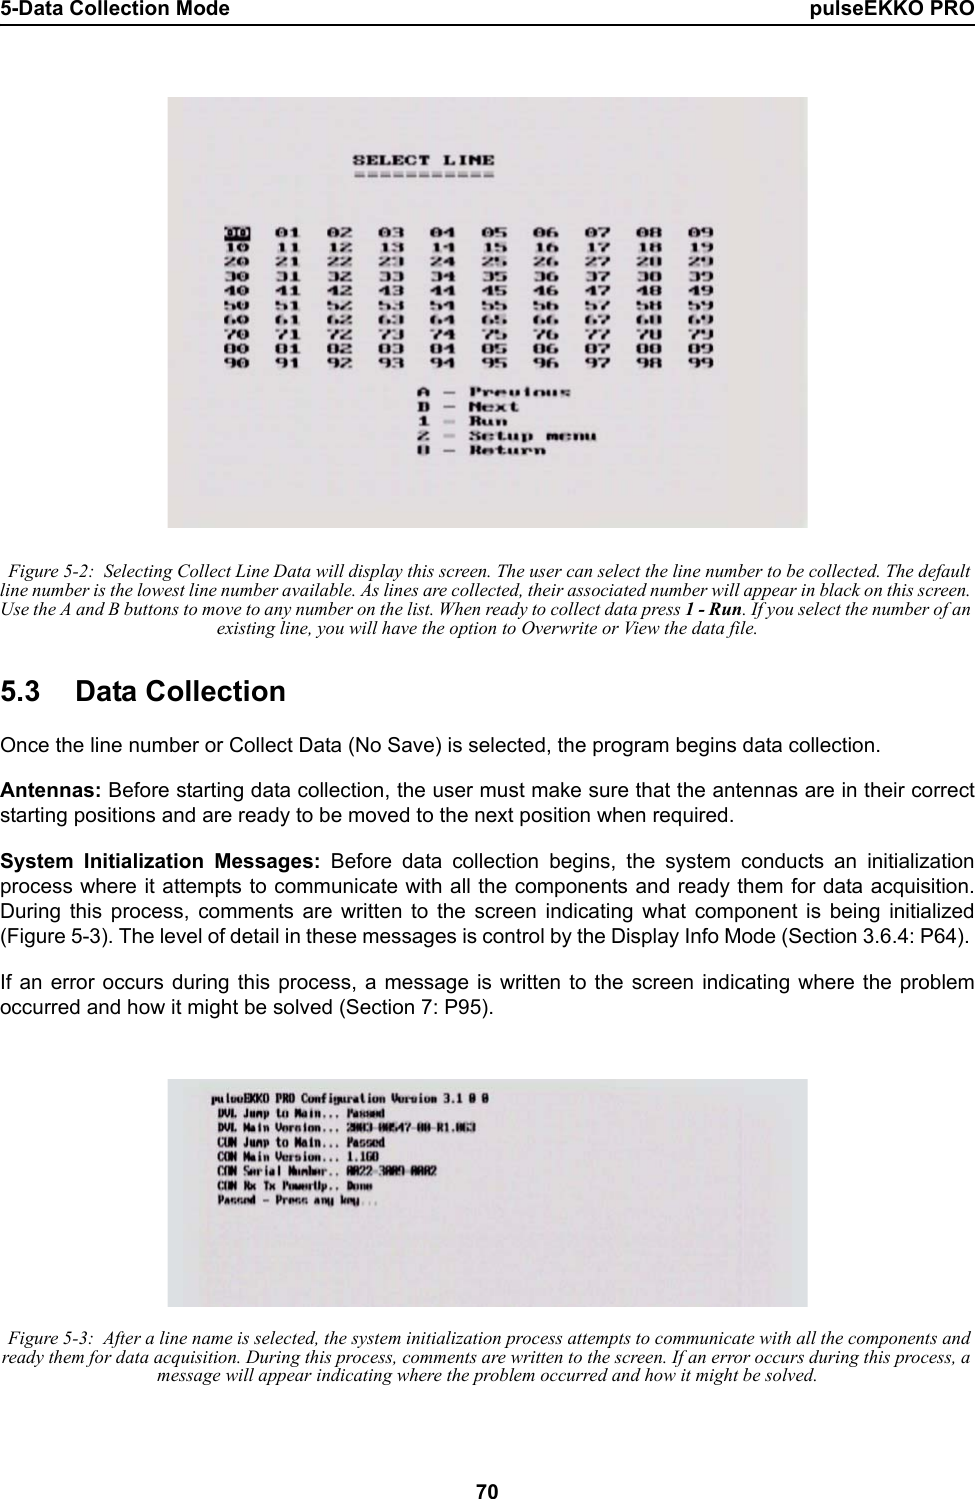 5-Data Collection Mode pulseEKKO PRO70 Figure 5-2:  Selecting Collect Line Data will display this screen. The user can select the line number to be collected. The default line number is the lowest line number available. As lines are collected, their associated number will appear in black on this screen. Use the A and B buttons to move to any number on the list. When ready to collect data press 1 - Run. If you select the number of an existing line, you will have the option to Overwrite or View the data file.5.3 Data CollectionOnce the line number or Collect Data (No Save) is selected, the program begins data collection.  Antennas: Before starting data collection, the user must make sure that the antennas are in their correctstarting positions and are ready to be moved to the next position when required. System Initialization Messages: Before data collection begins, the system conducts an initializationprocess where it attempts to communicate with all the components and ready them for data acquisition.During this process, comments are written to the screen indicating what component is being initialized(Figure 5-3). The level of detail in these messages is control by the Display Info Mode (Section 3.6.4: P64). If an error occurs during this process, a message is written to the screen indicating where the problemoccurred and how it might be solved (Section 7: P95).  Figure 5-3:  After a line name is selected, the system initialization process attempts to communicate with all the components and ready them for data acquisition. During this process, comments are written to the screen. If an error occurs during this process, a message will appear indicating where the problem occurred and how it might be solved.